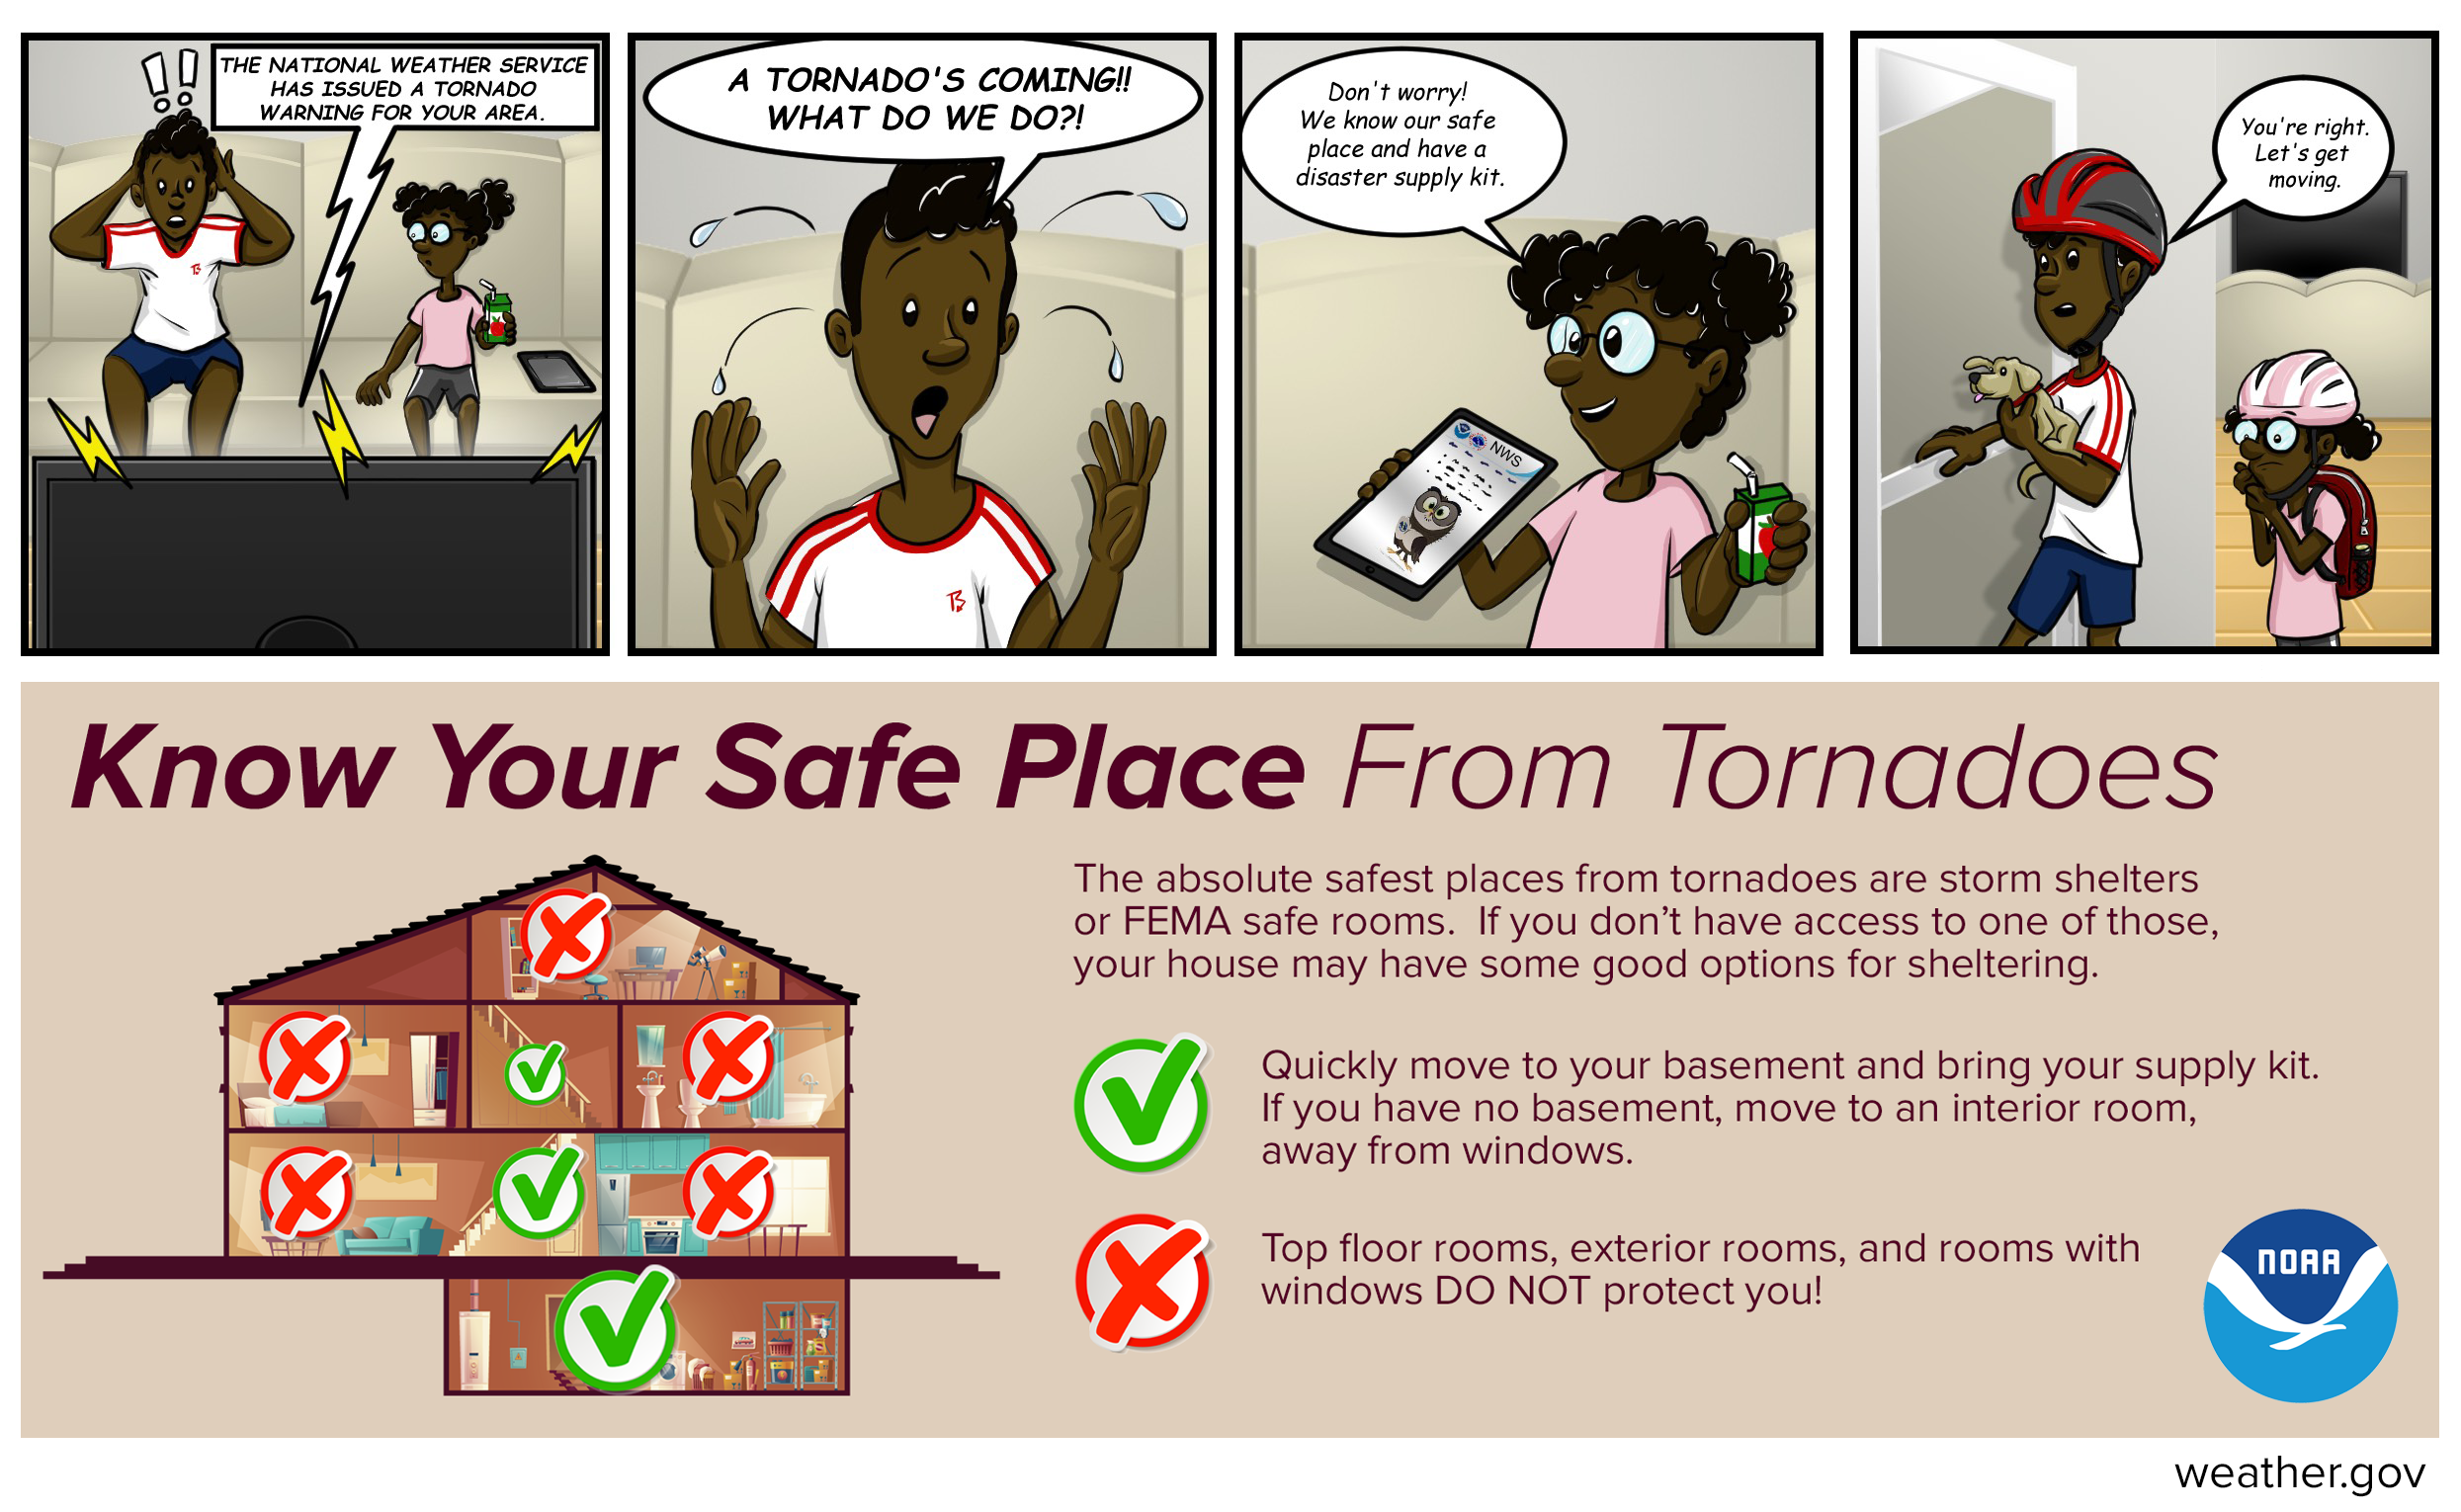 Know your safe place from tornadoes. The absolute safest places from tornadoes are storm shelters or FEMA safe rooms. If you don't have access to one of those, your house may have some good options for sheltering. Quickly move to your basement and bring your supply kit. If you have no basement, move to an interior room, away from windows. Top floor rooms, exterior rooms, and rooms with windows do not protect you.